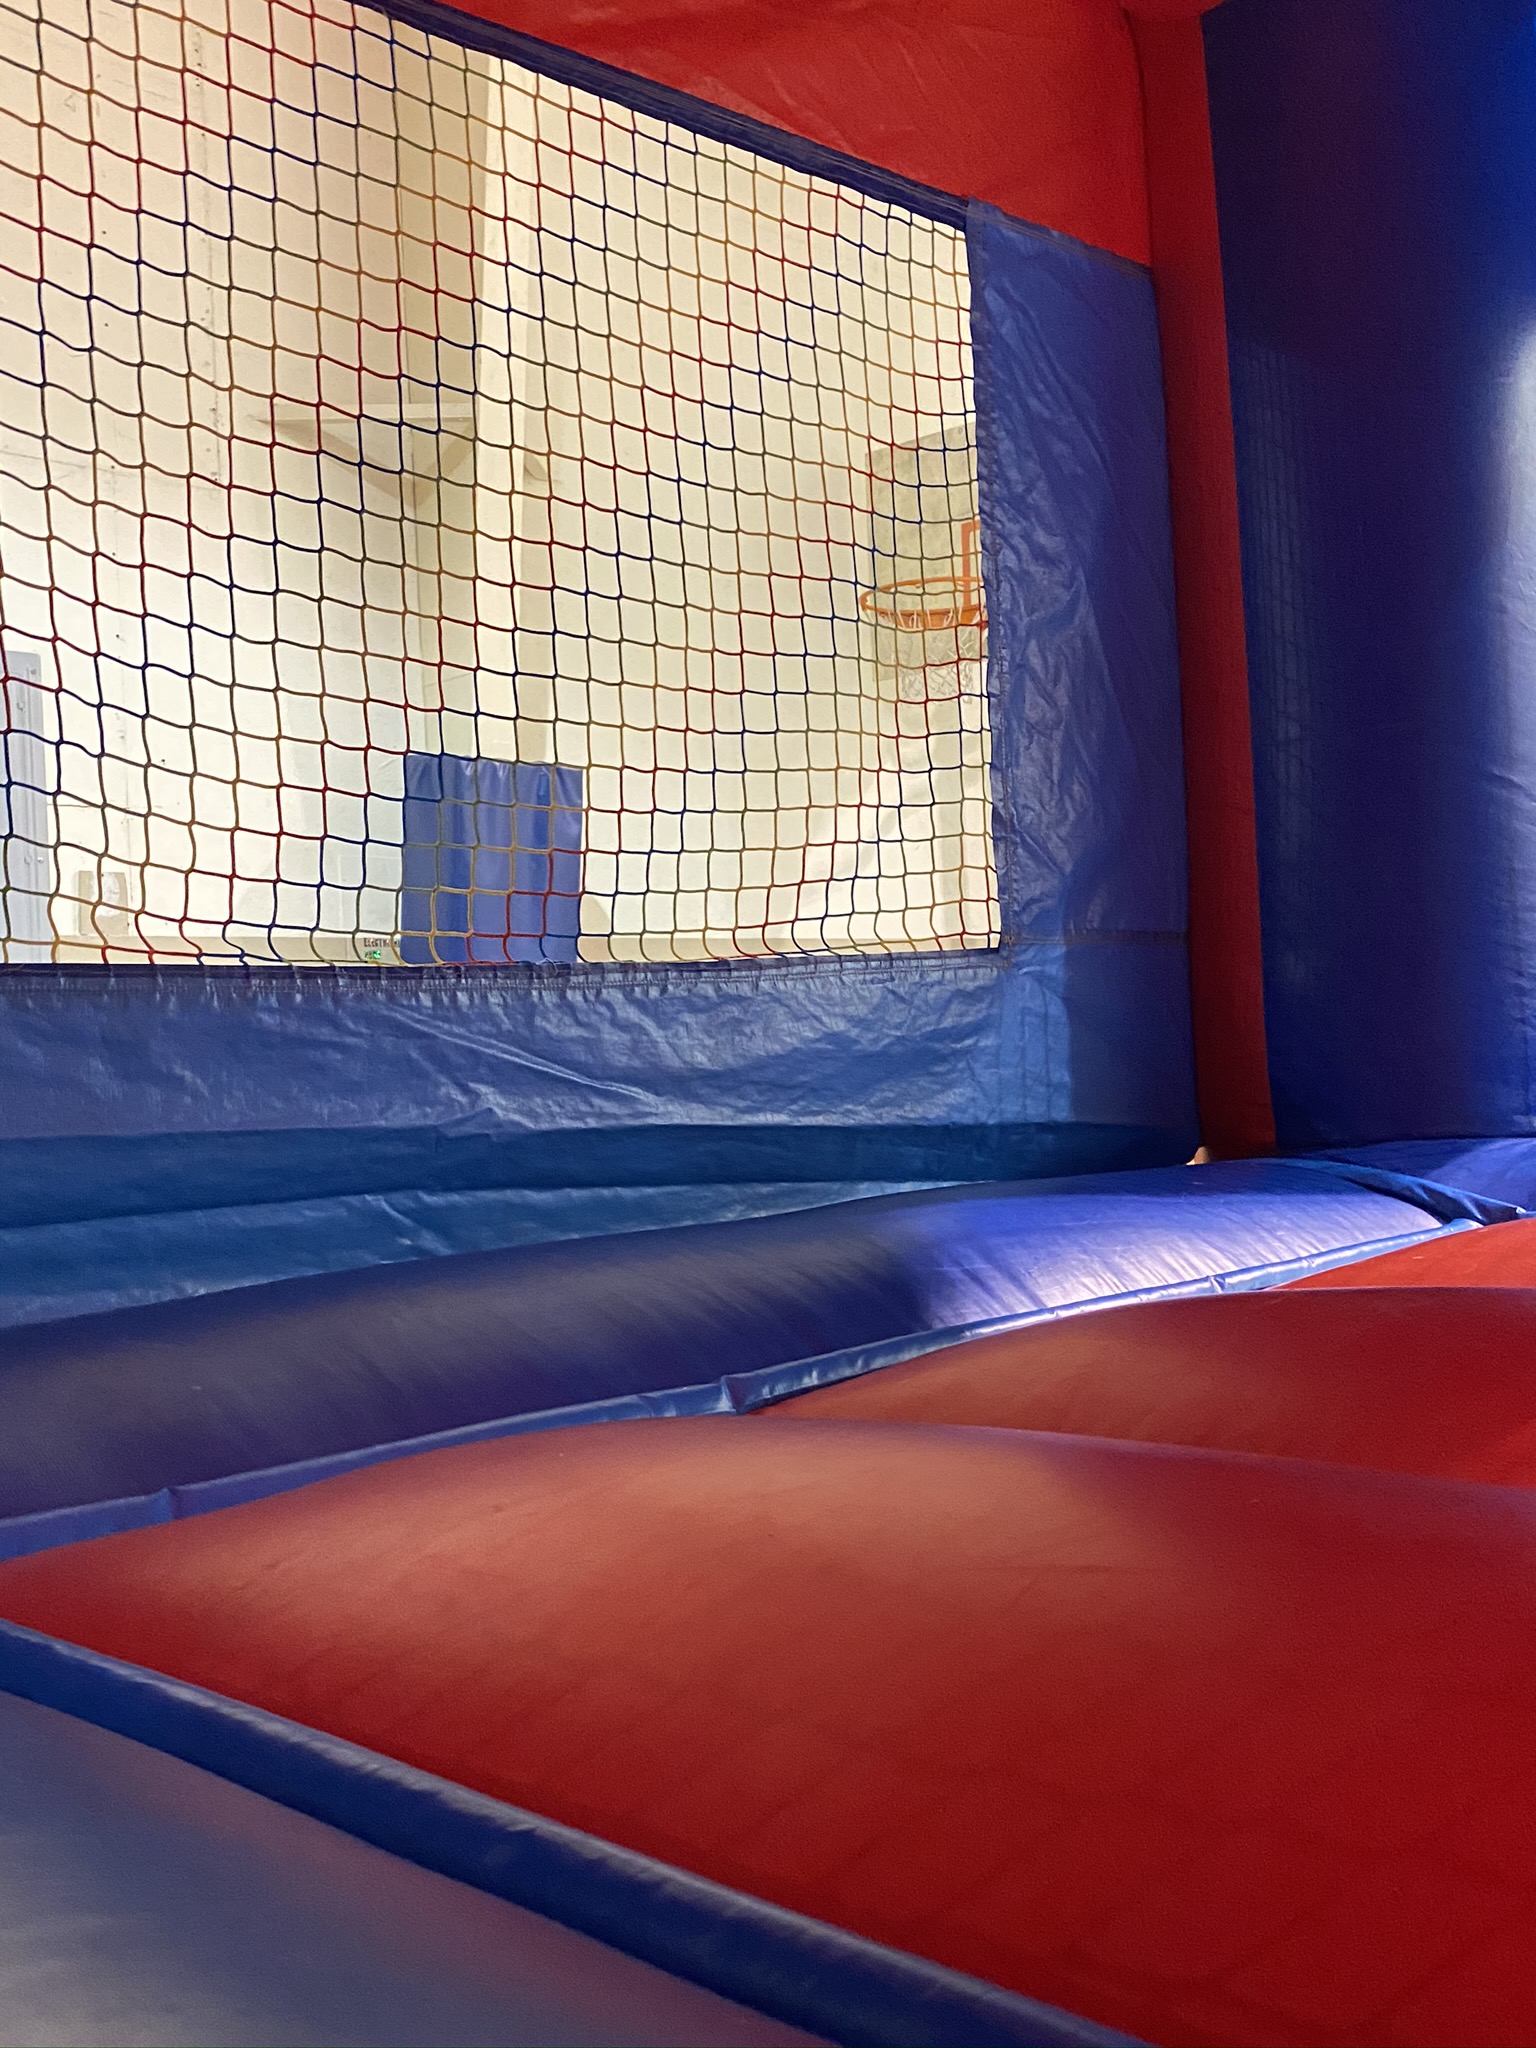 Bounce house Rentals